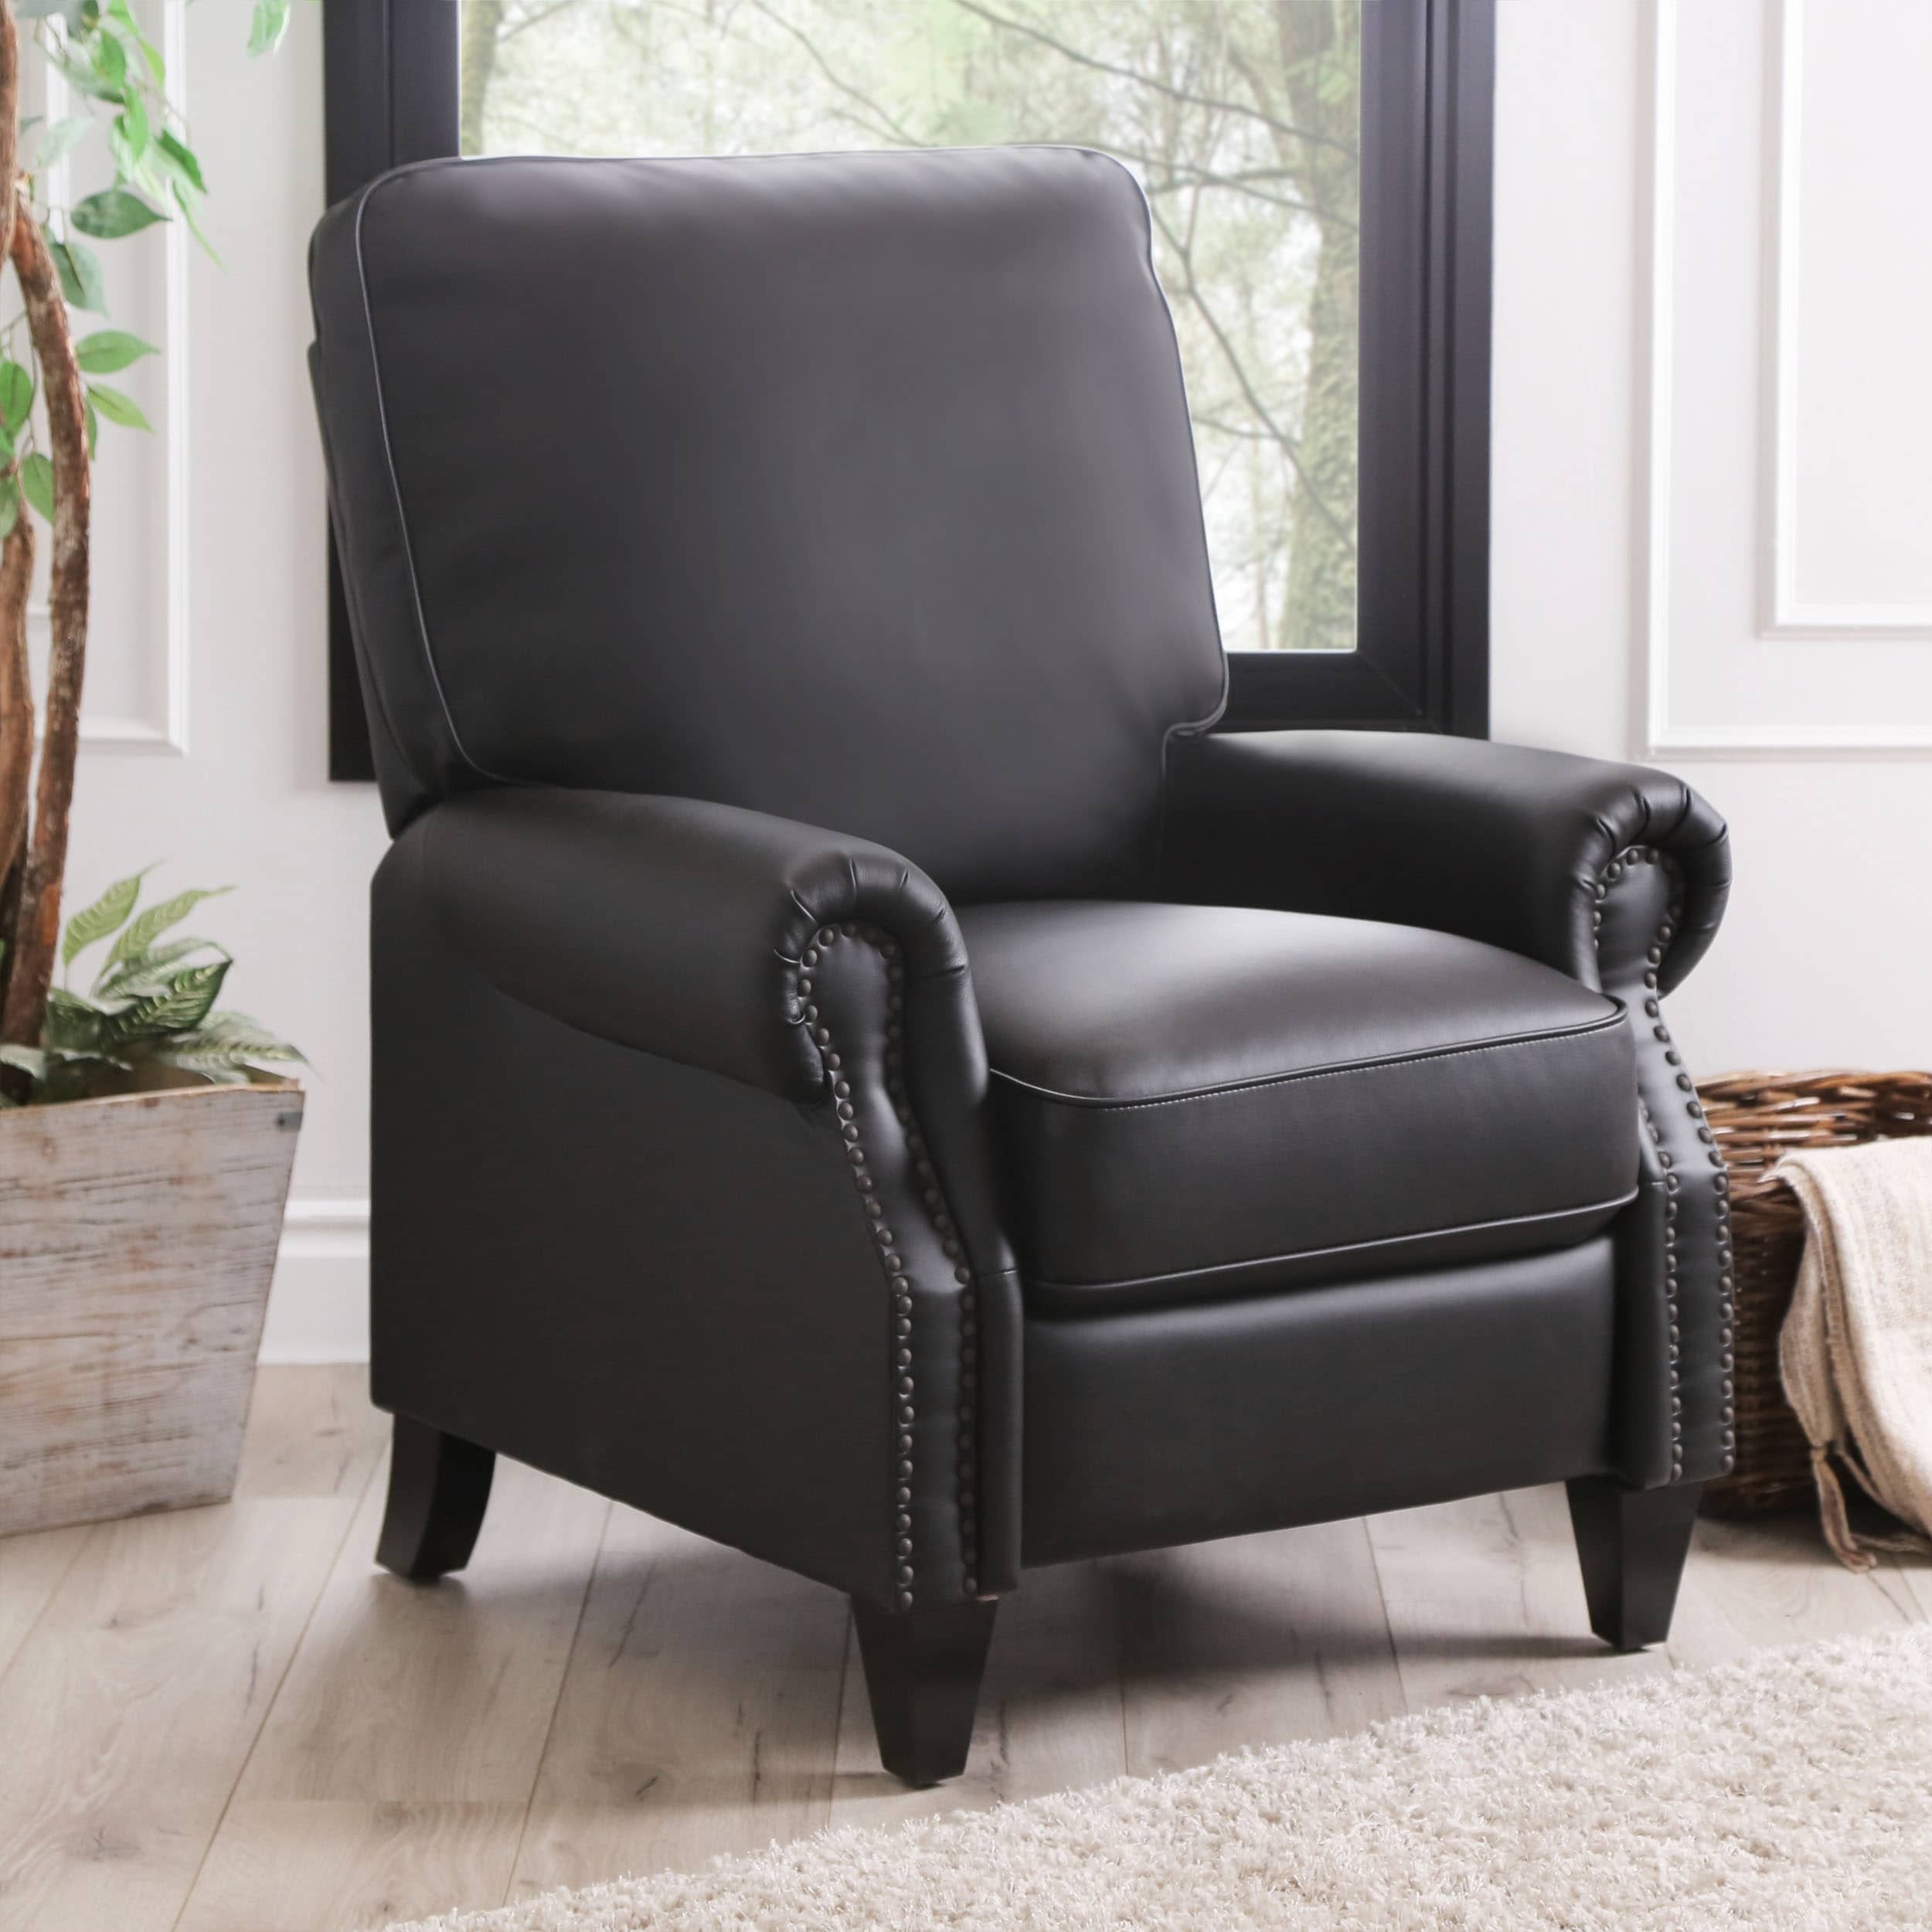 https://ak1.ostkcdn.com/images/products/is/images/direct/3f3d3f48cd962e16e752390c5f3b1f6aca6a7636/Abbyson-Carla-Bonded-Leather-Pushback-Recliner.jpg